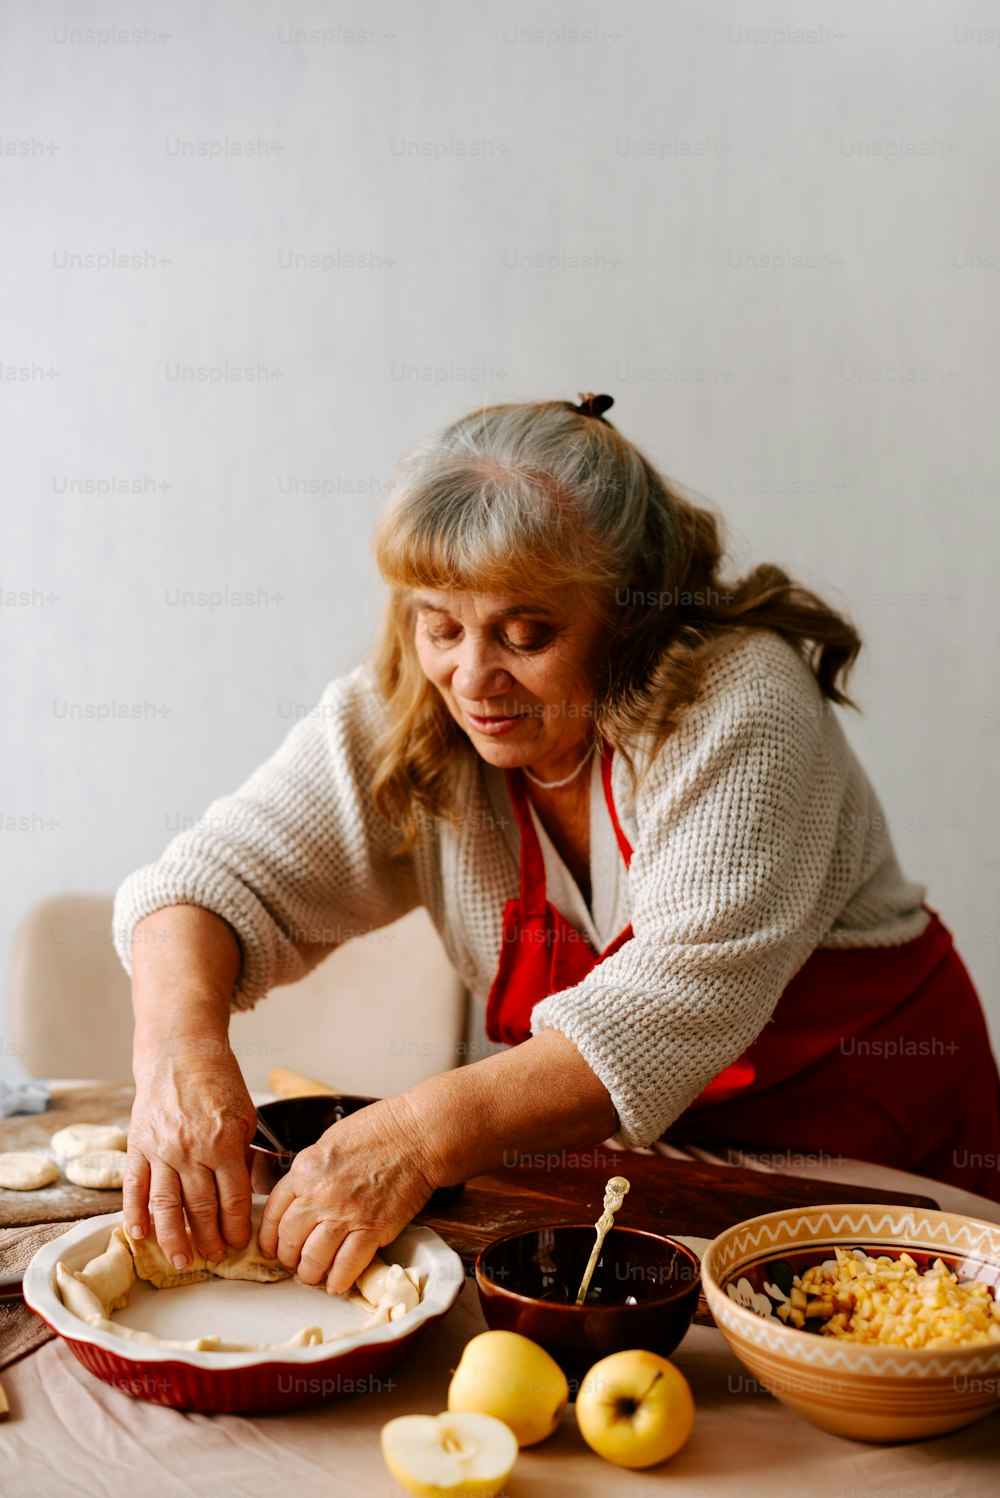 a woman in an apron preparing food on a table